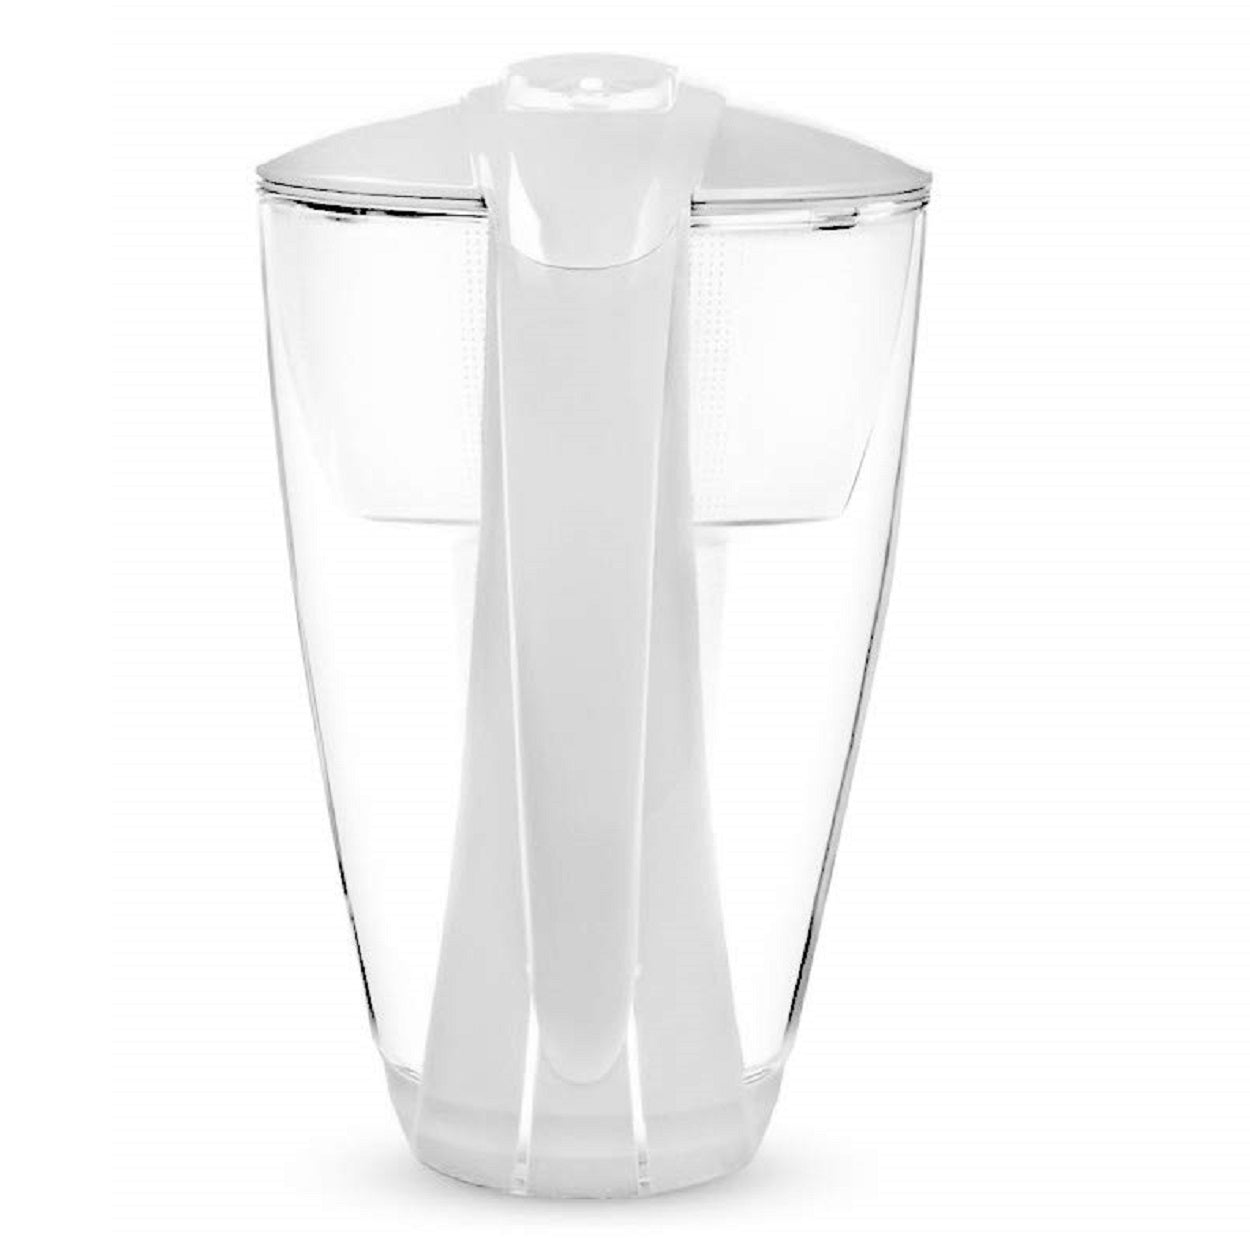 PearlCo Glass Water Filter Jug LED Classic 2 Litre + 3 Cartridges - White